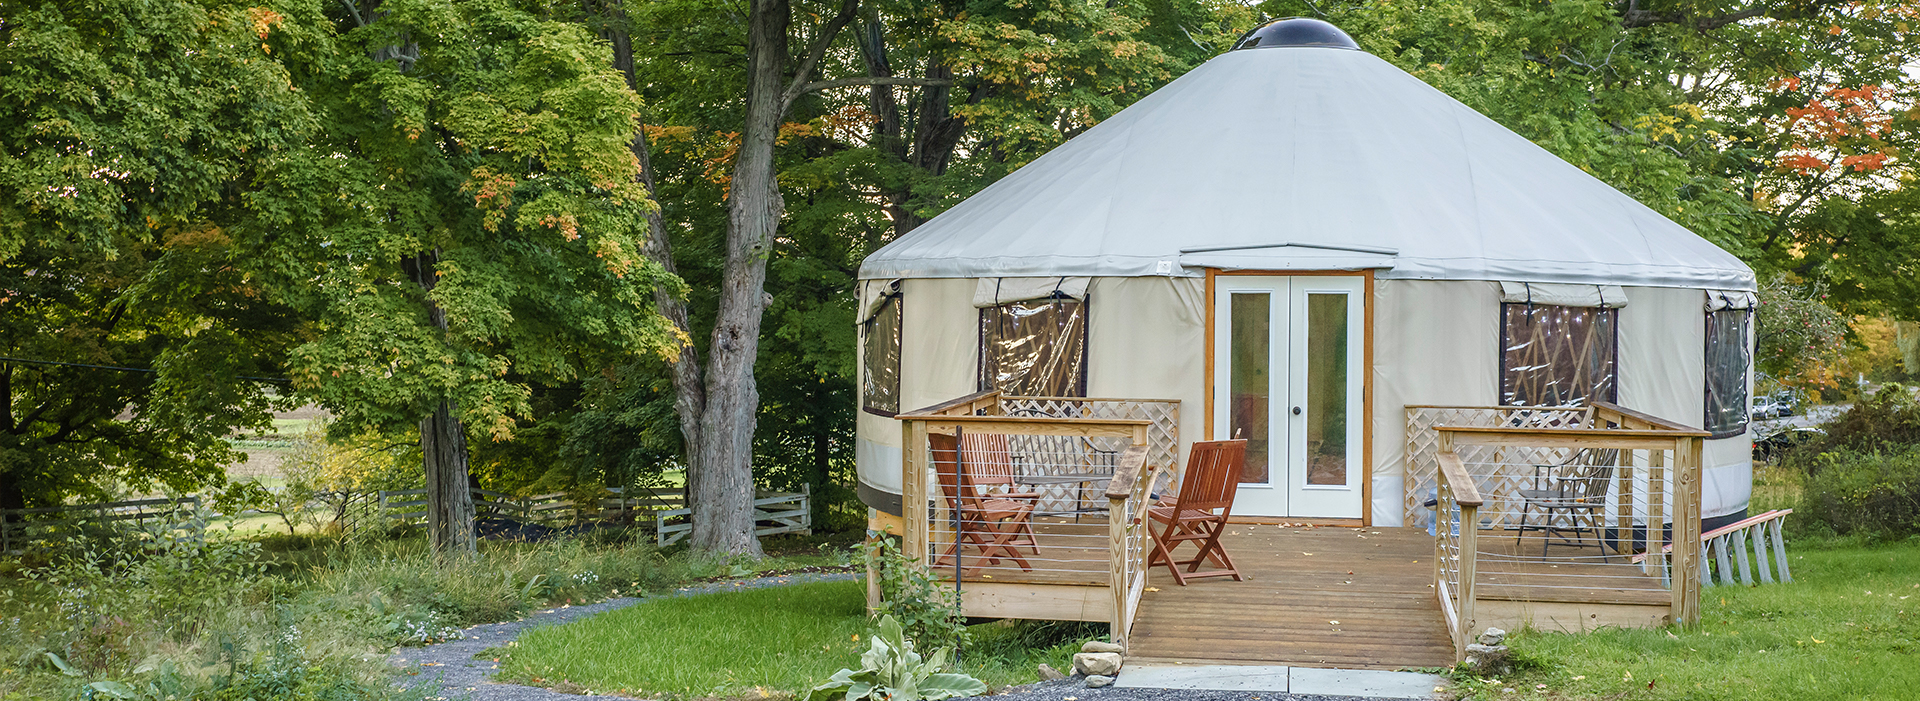 shelter designs yurt with a porch and chairs